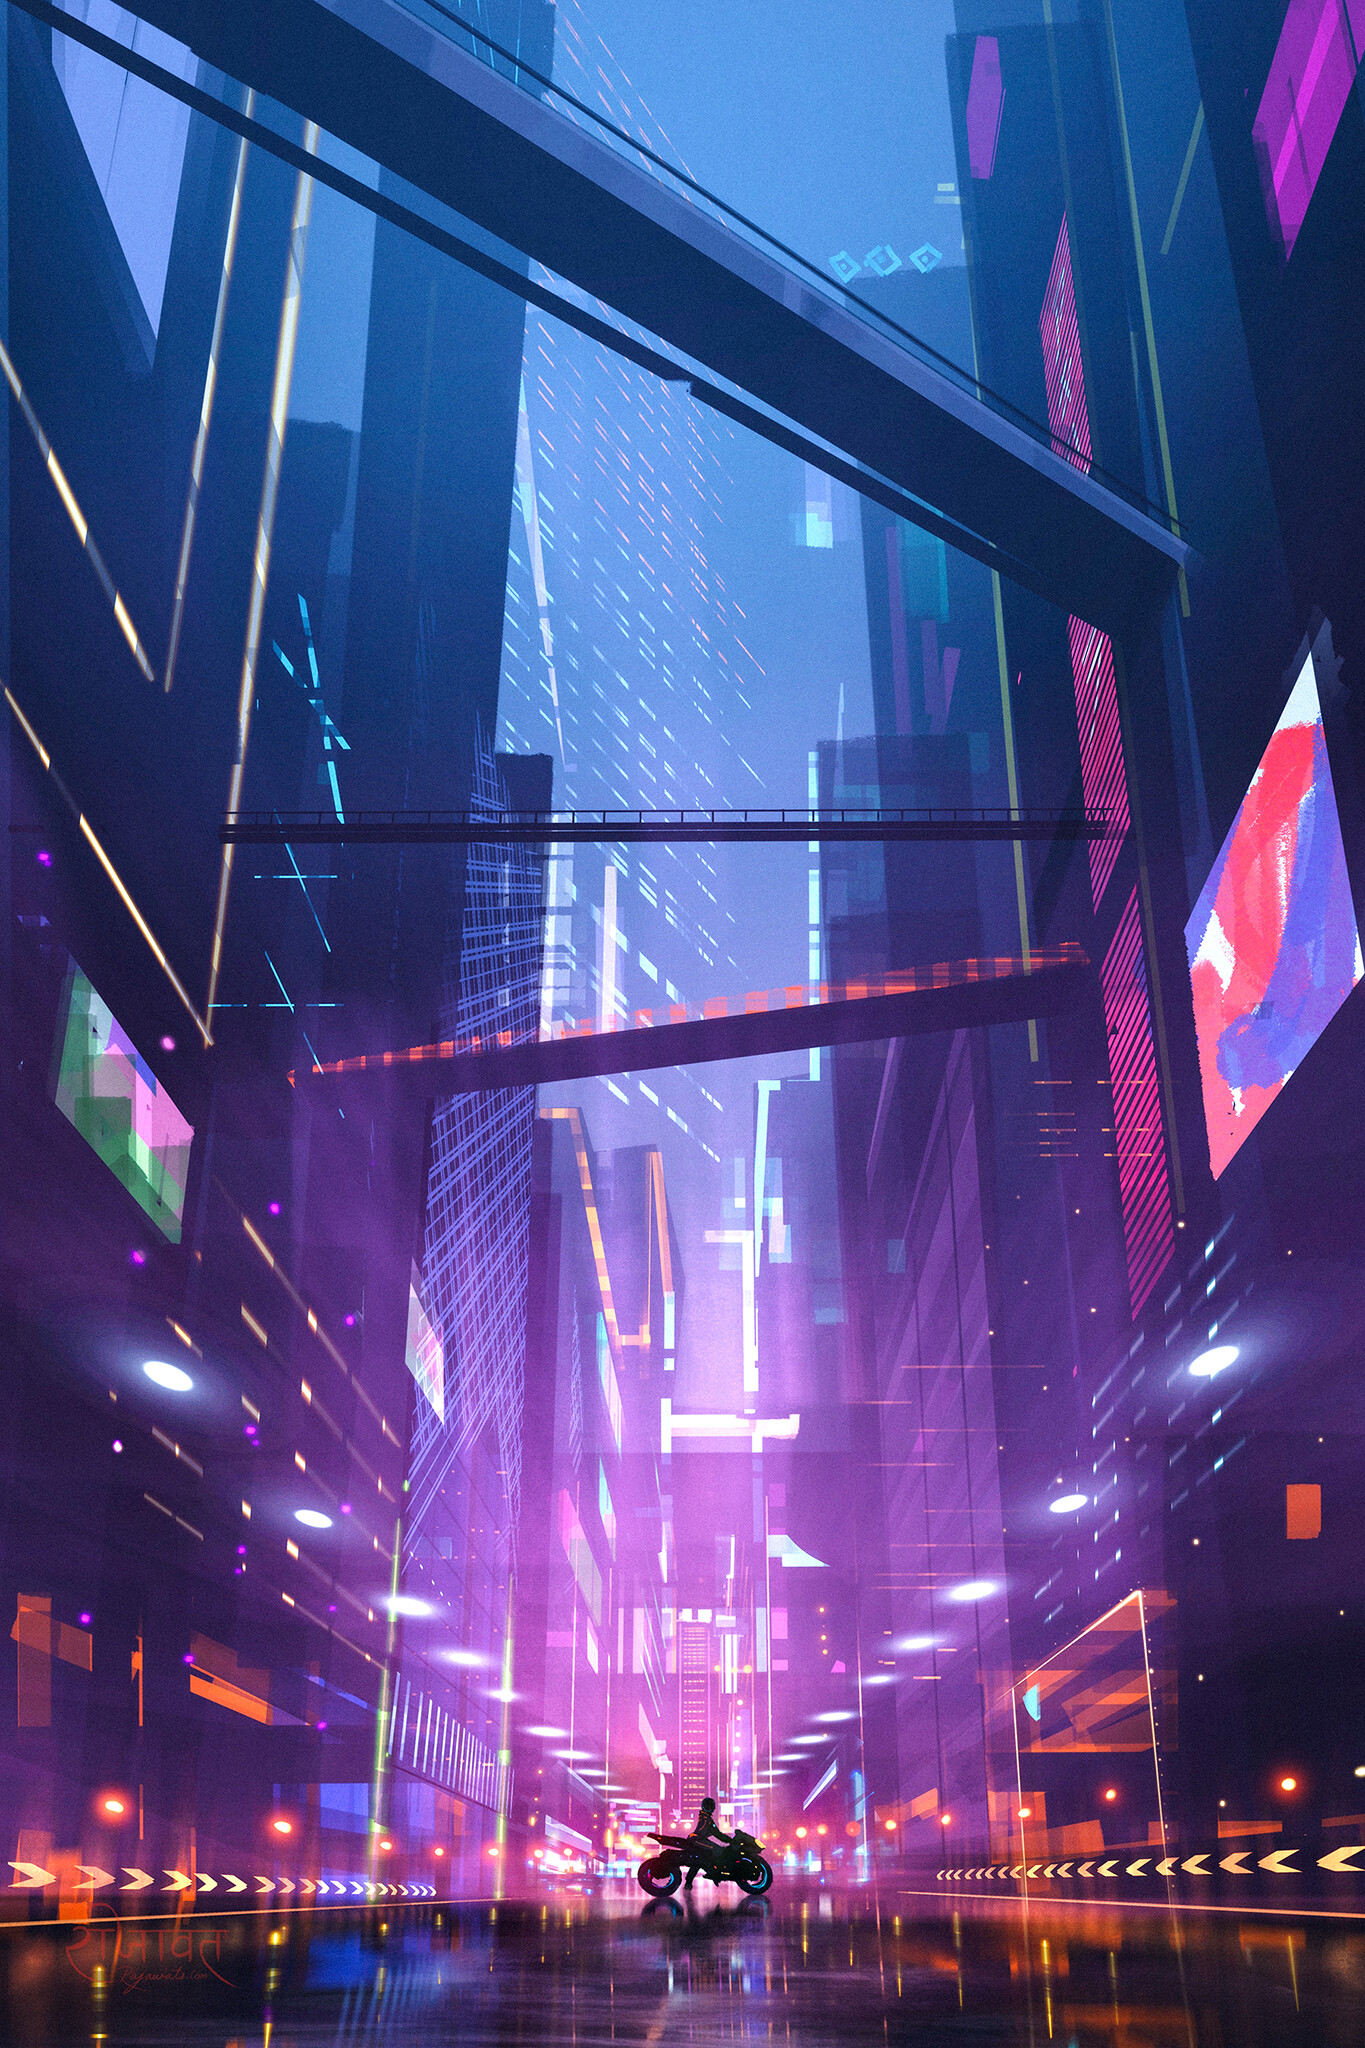 cyberpunk iphone wallpaper great selling Save 59 available   wwwhumumssedubo